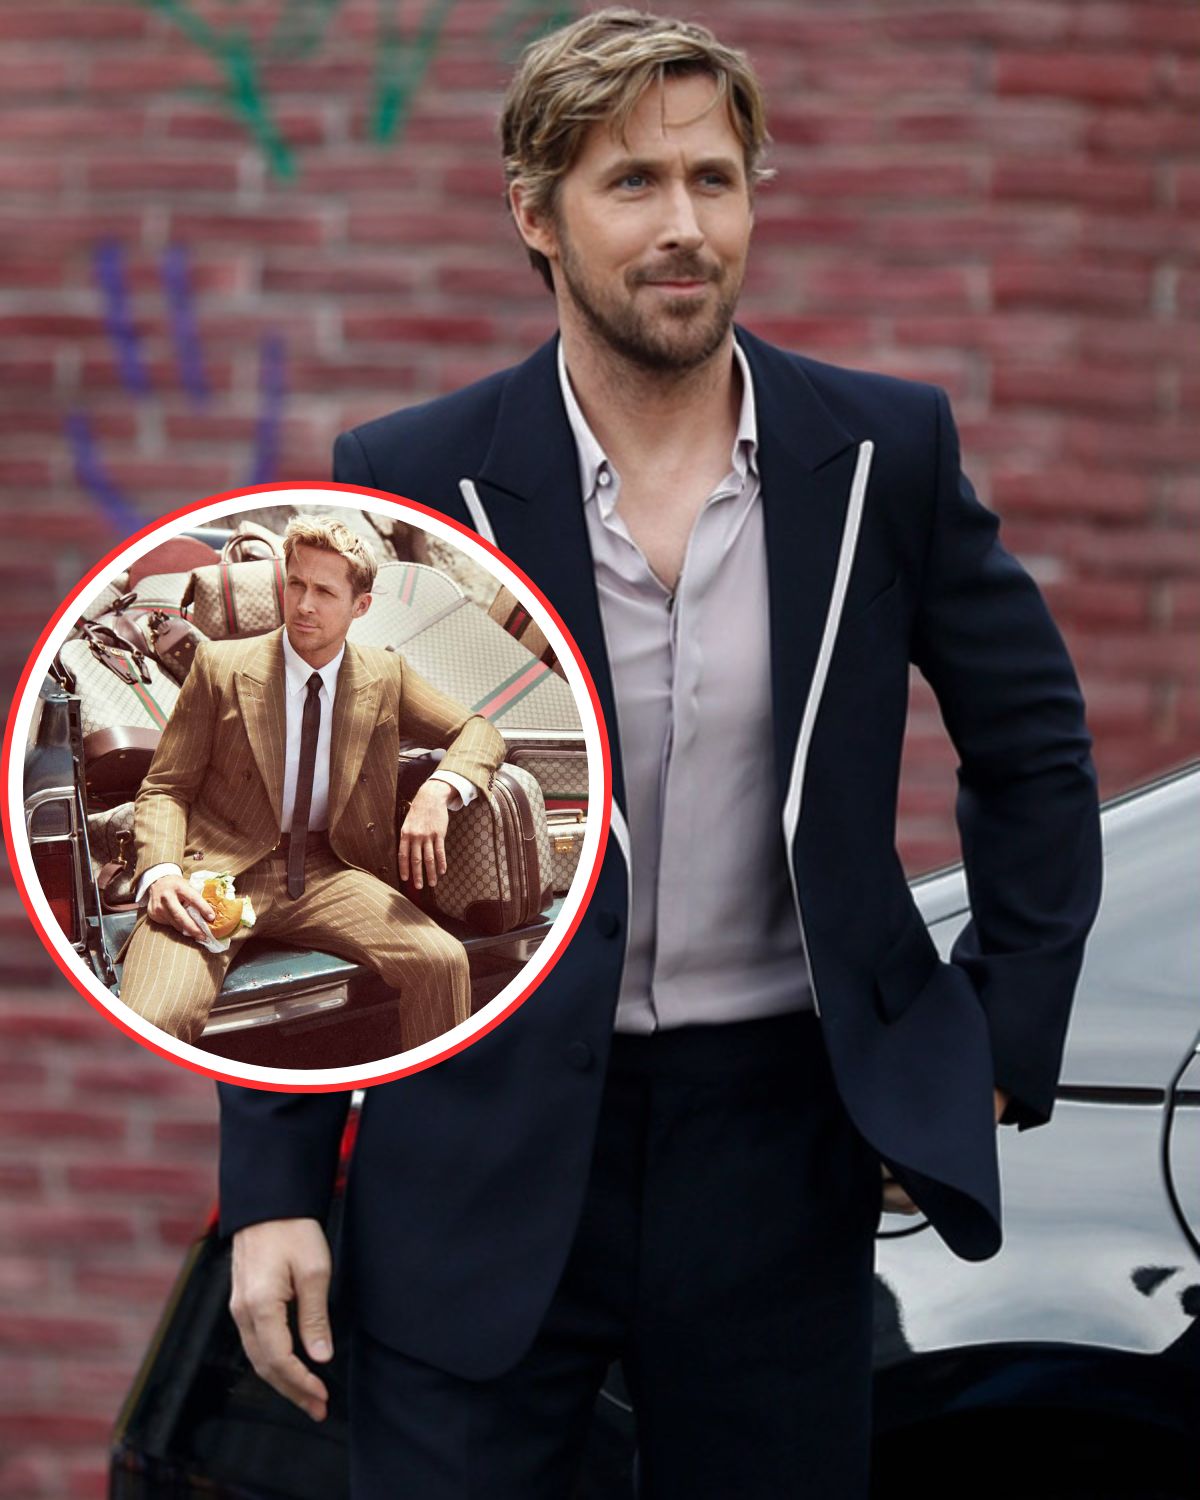 Cover Image for Hollywood to Haute Couture: Ryan Gosling Launches Personal Fashion Brand